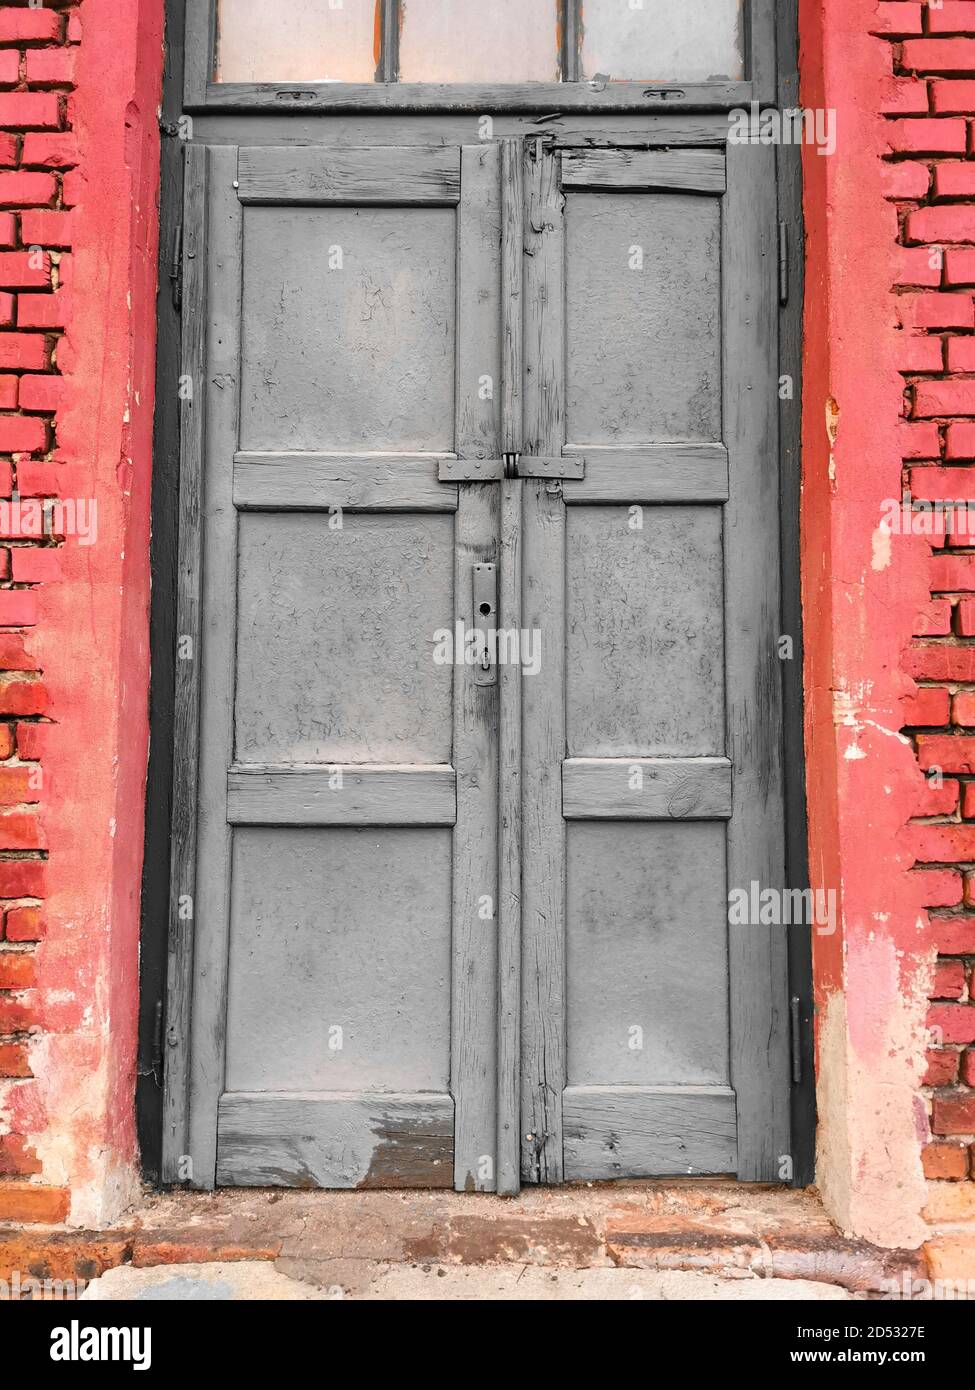 Half of House Ruined Color Ruins Stock Photo - Image of architecture, doors:  88913718